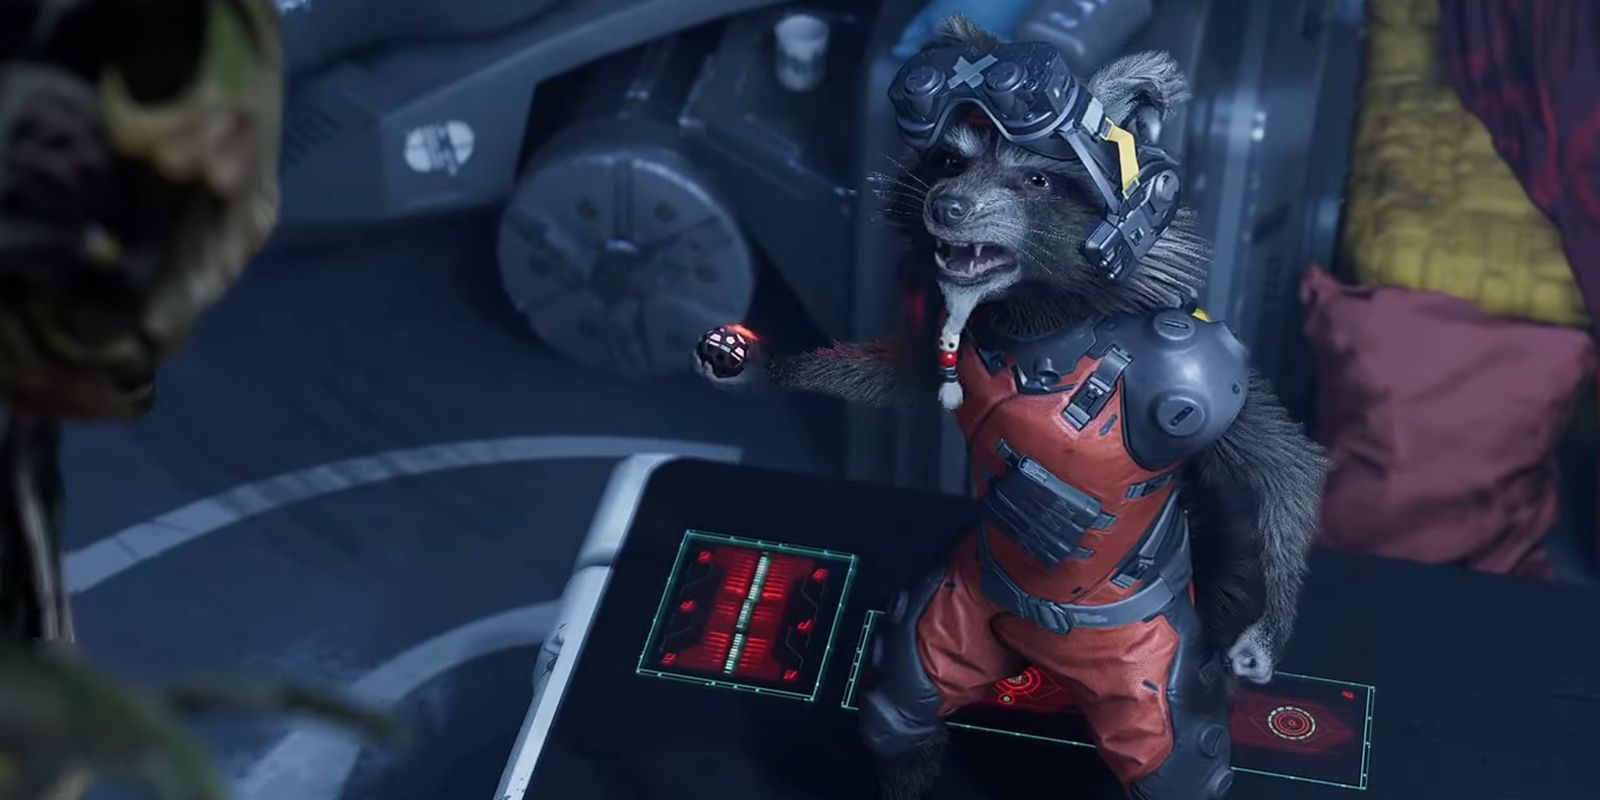 Rocket wielding a grenade while arguing with Groot in Marvel's Guardians Of The Galaxy